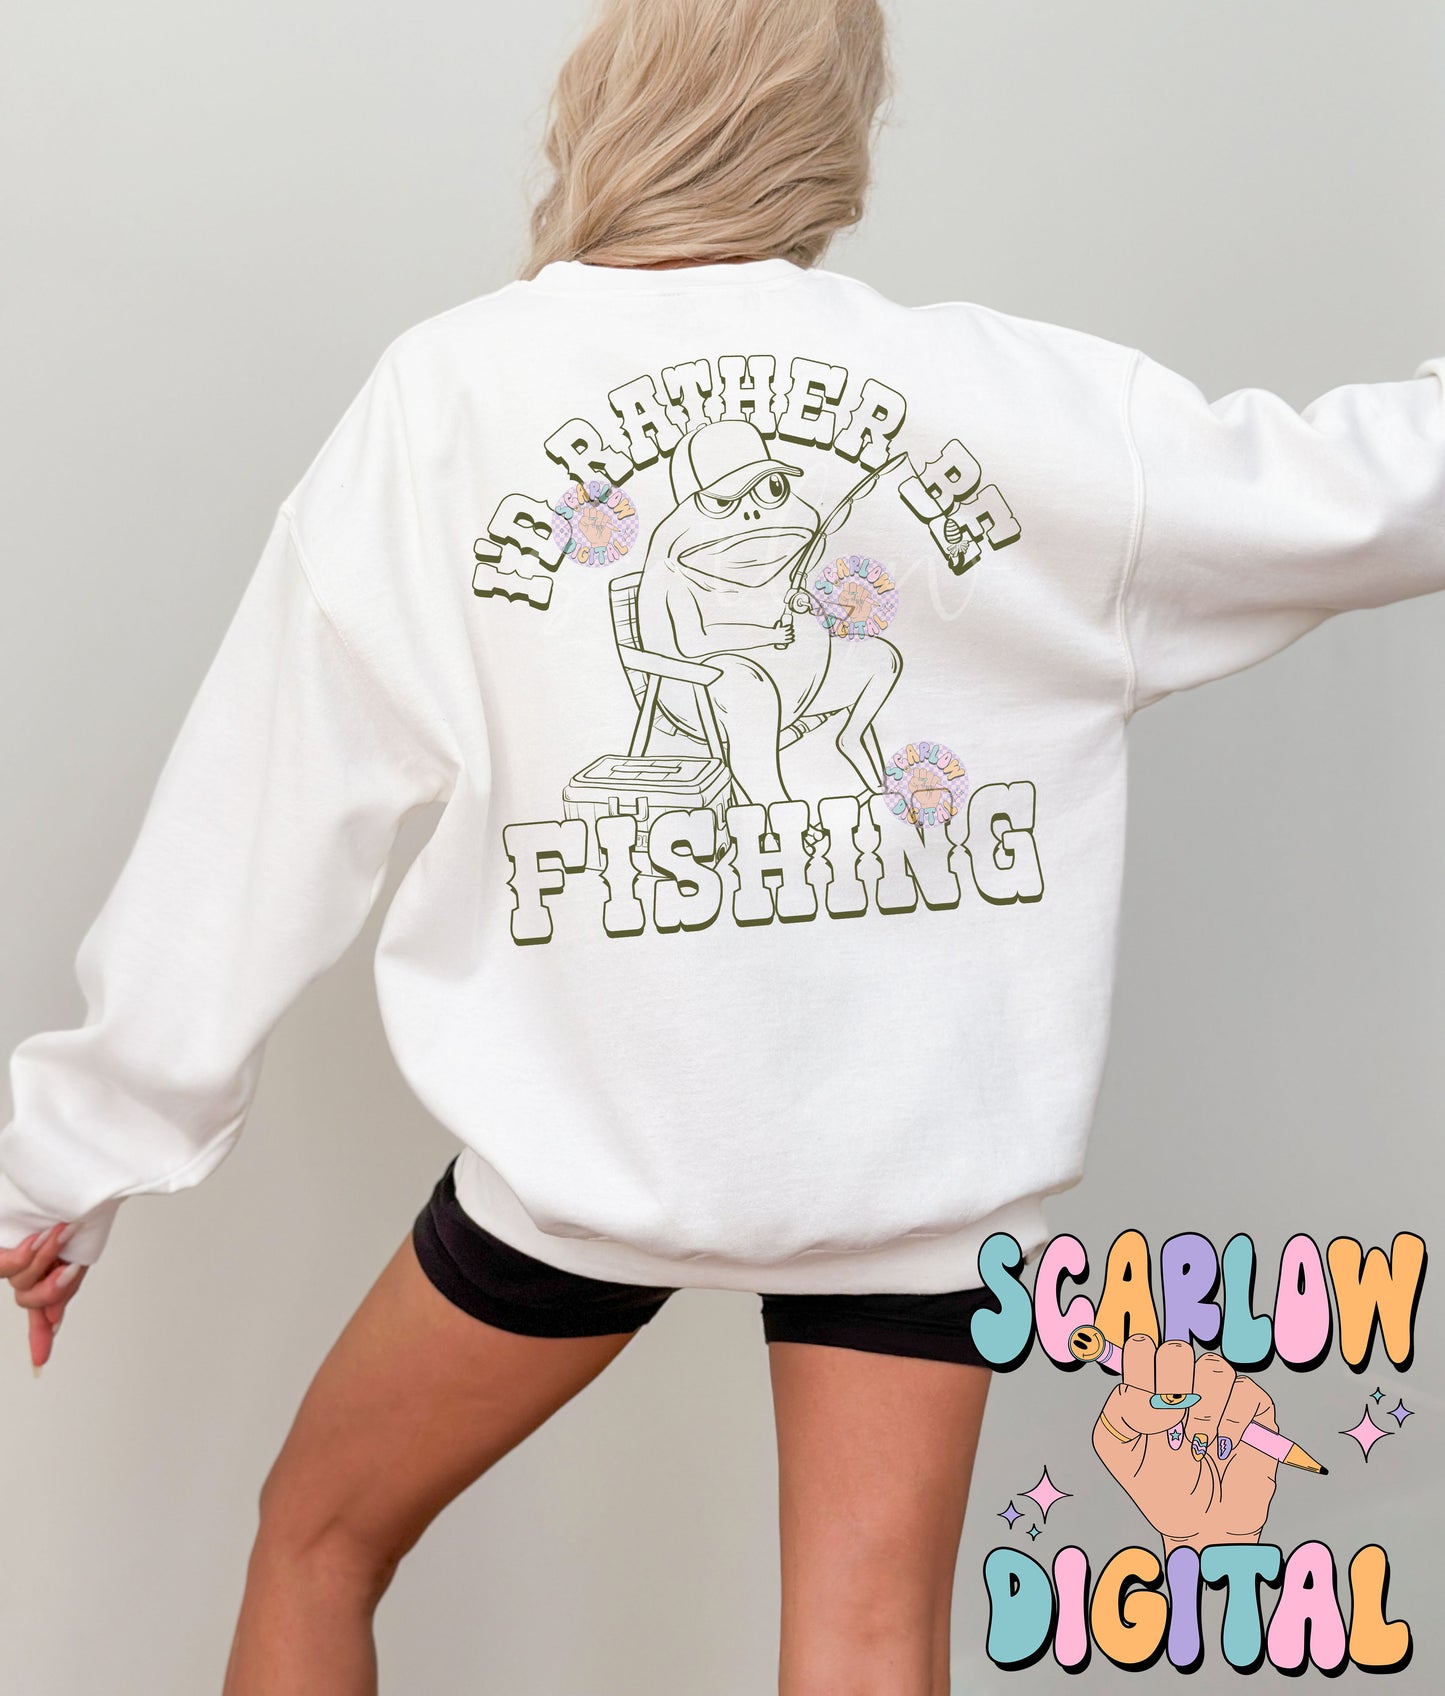 Rather Be Fishing PNG Digital Design Download, funny png, men's png designs, adult humor png, outdoorsman png, hunting and fishing png